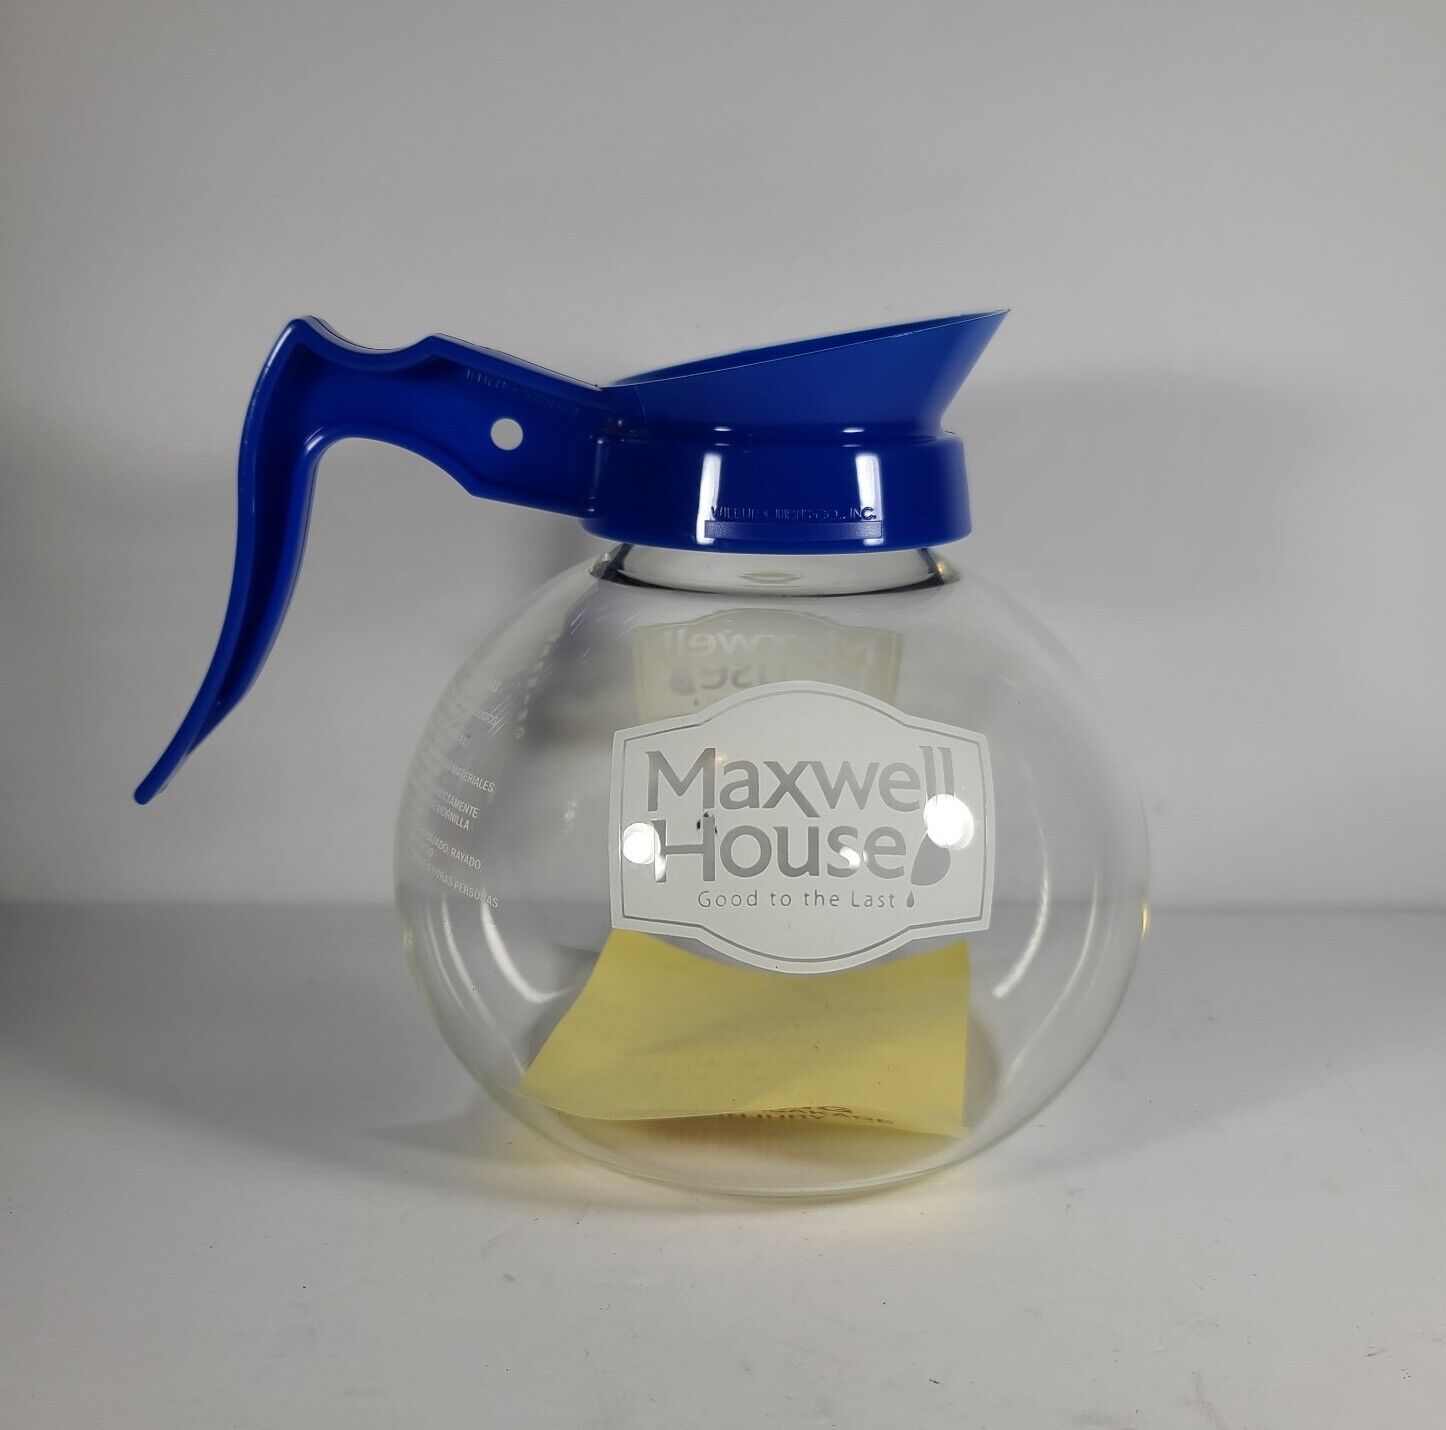 Vintage Diner Maxwell House Coffee Pot Carafe Decanter Made In Germany